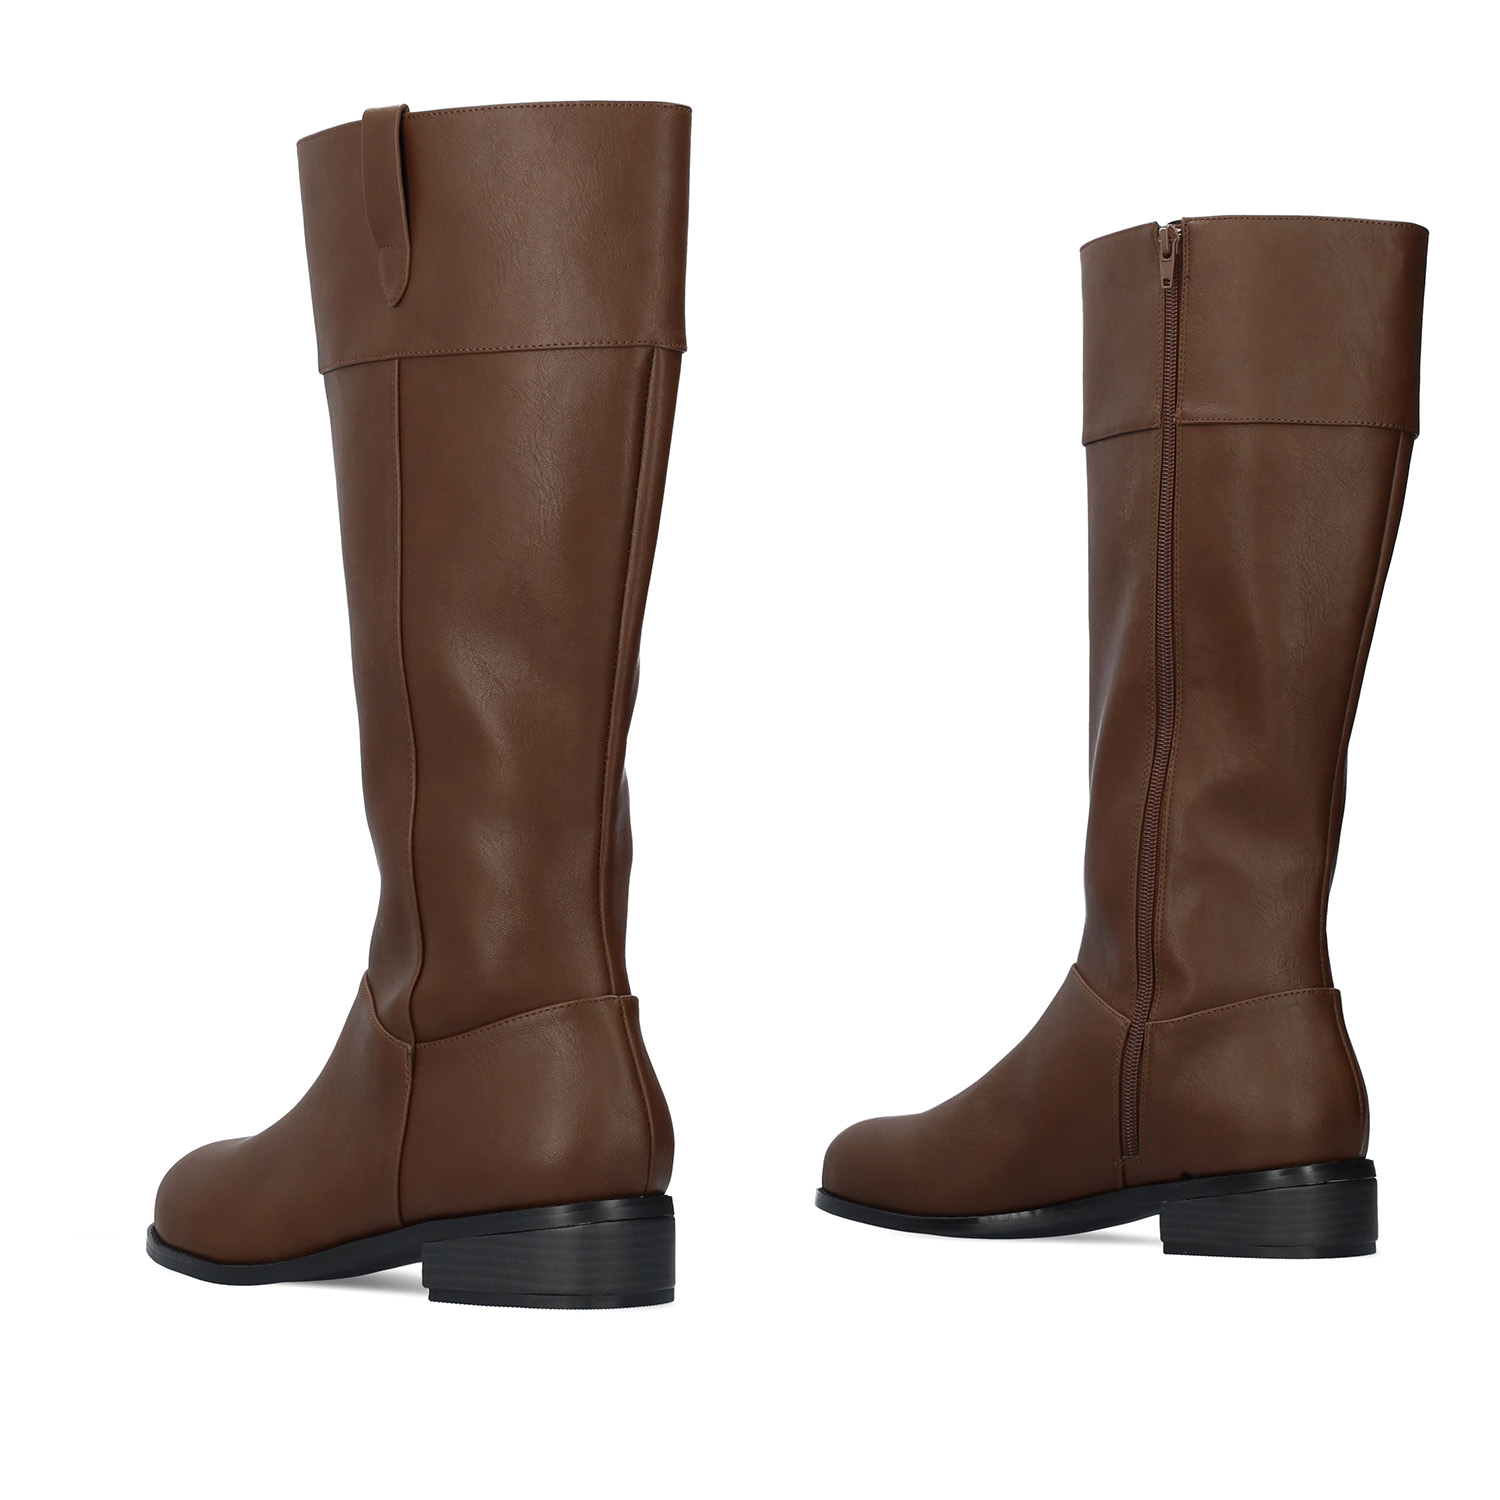 Flat high-calf boots in brown faux leather. 